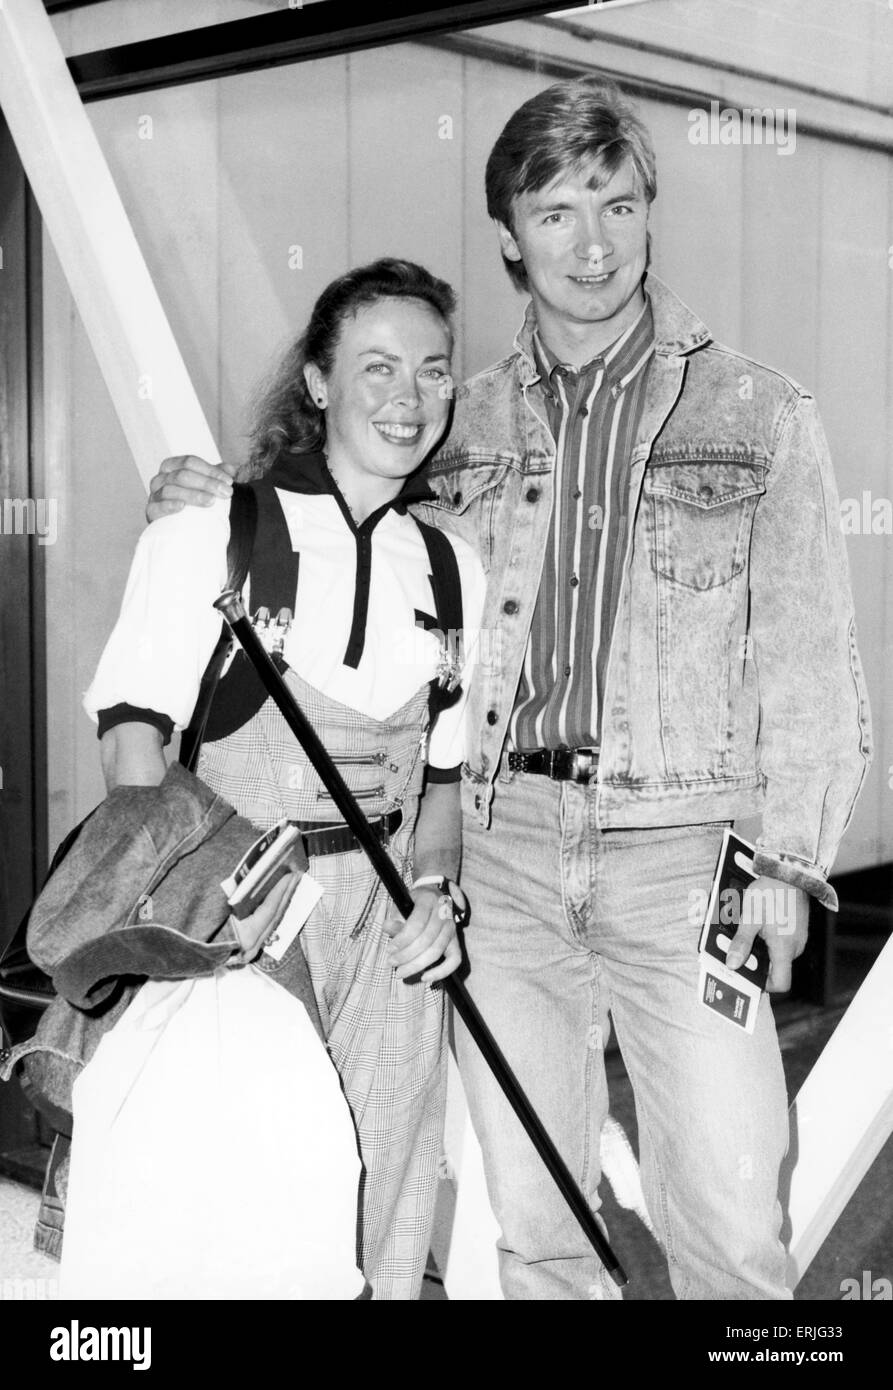 Skating superstar Christopher Dean is set to make a comeback with ice dance partner Jayne Torvill just three months after cheating death in a car crash. Dean who now limps is working out daily Australia. The couple are returning to Britain this month to rehearse for a north American tour. 12th March 1989 Stock Photo